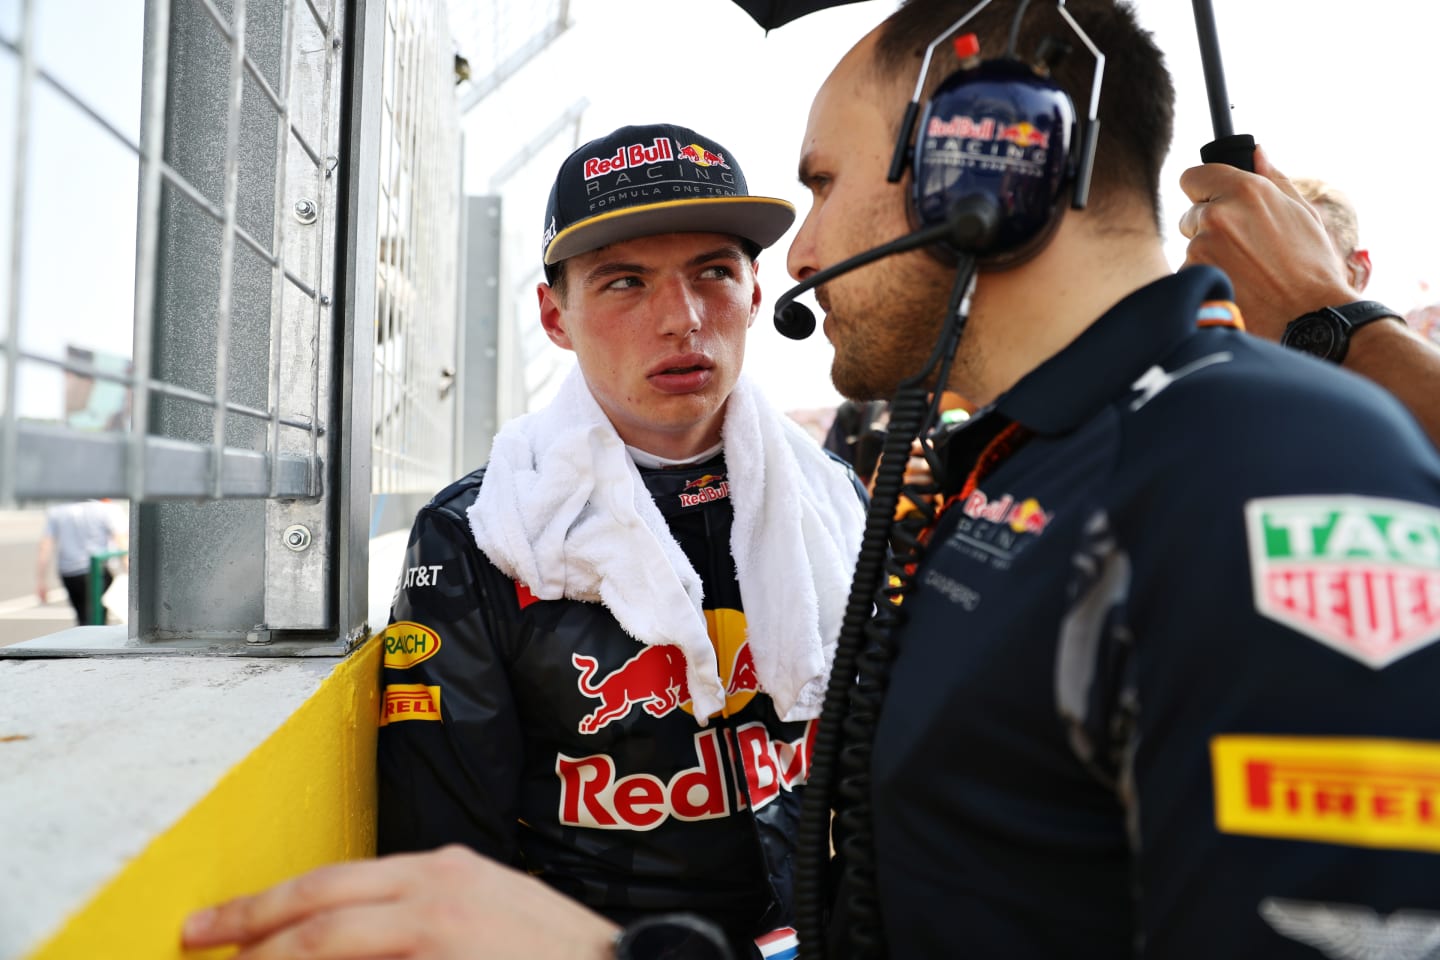 BUDAPEST, HUNGARY - JULY 24: Max Verstappen of Netherlands and Red Bull Racing talks to race